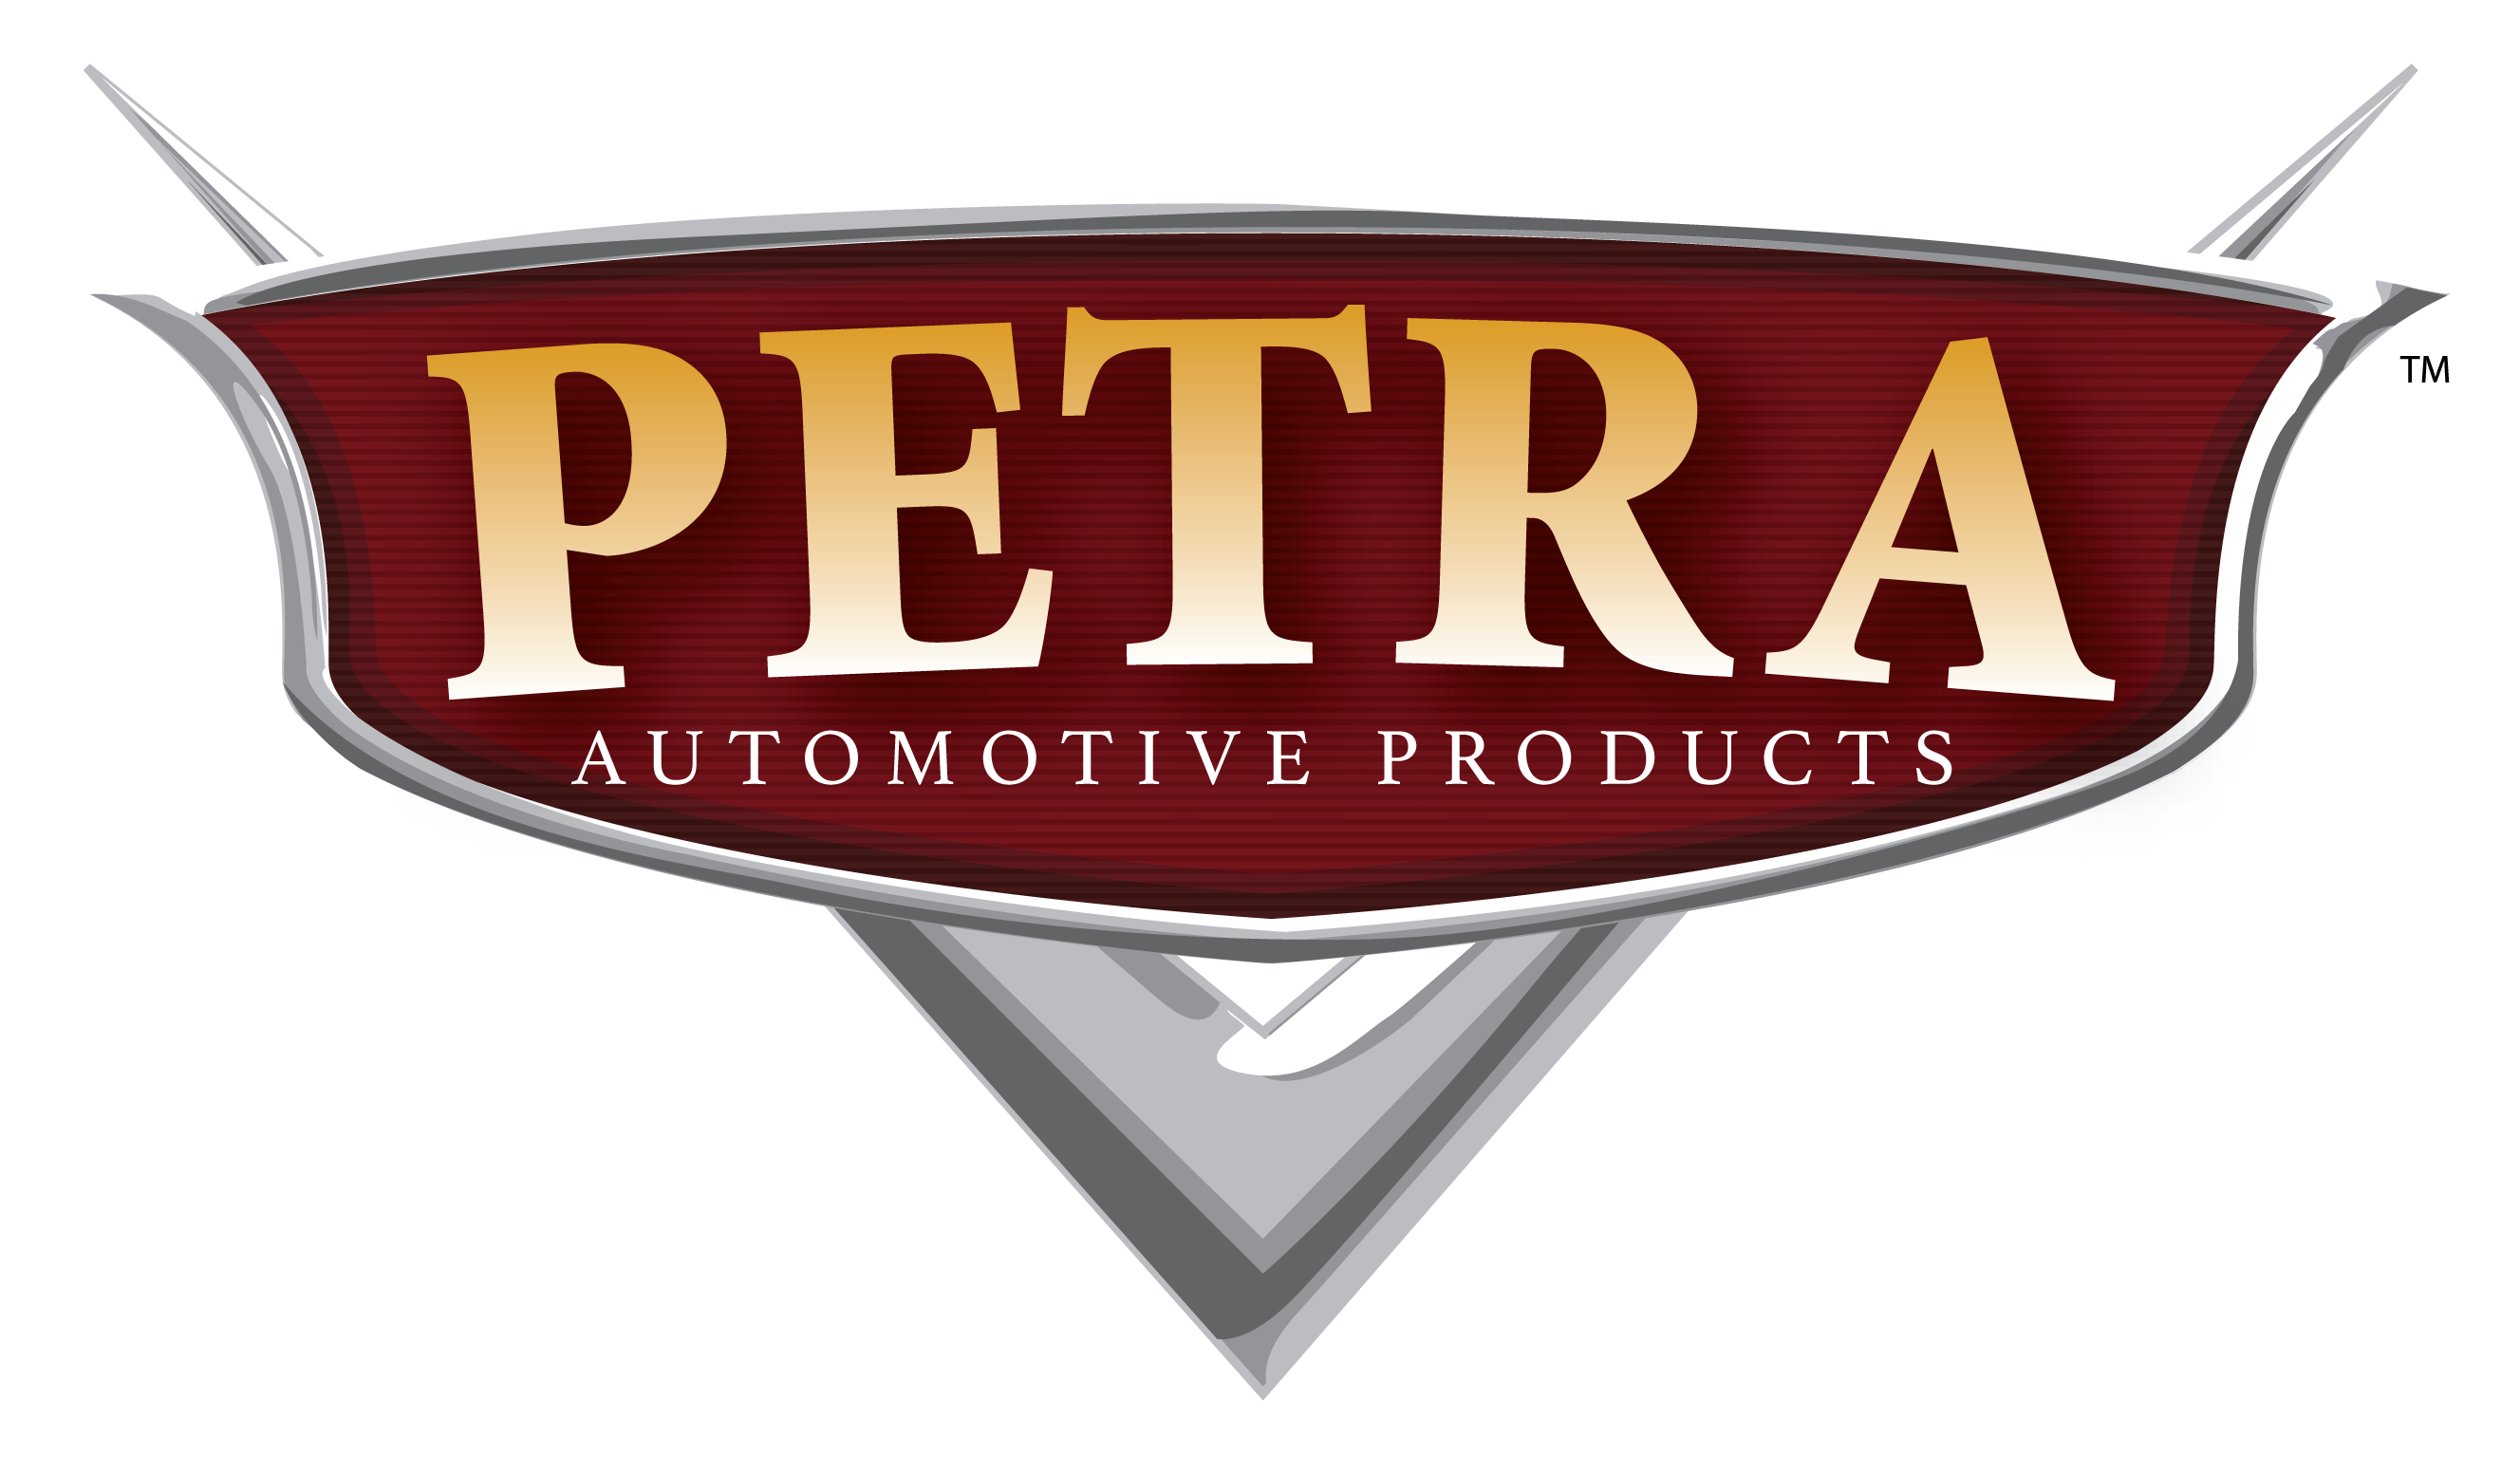 Petra Automative Products